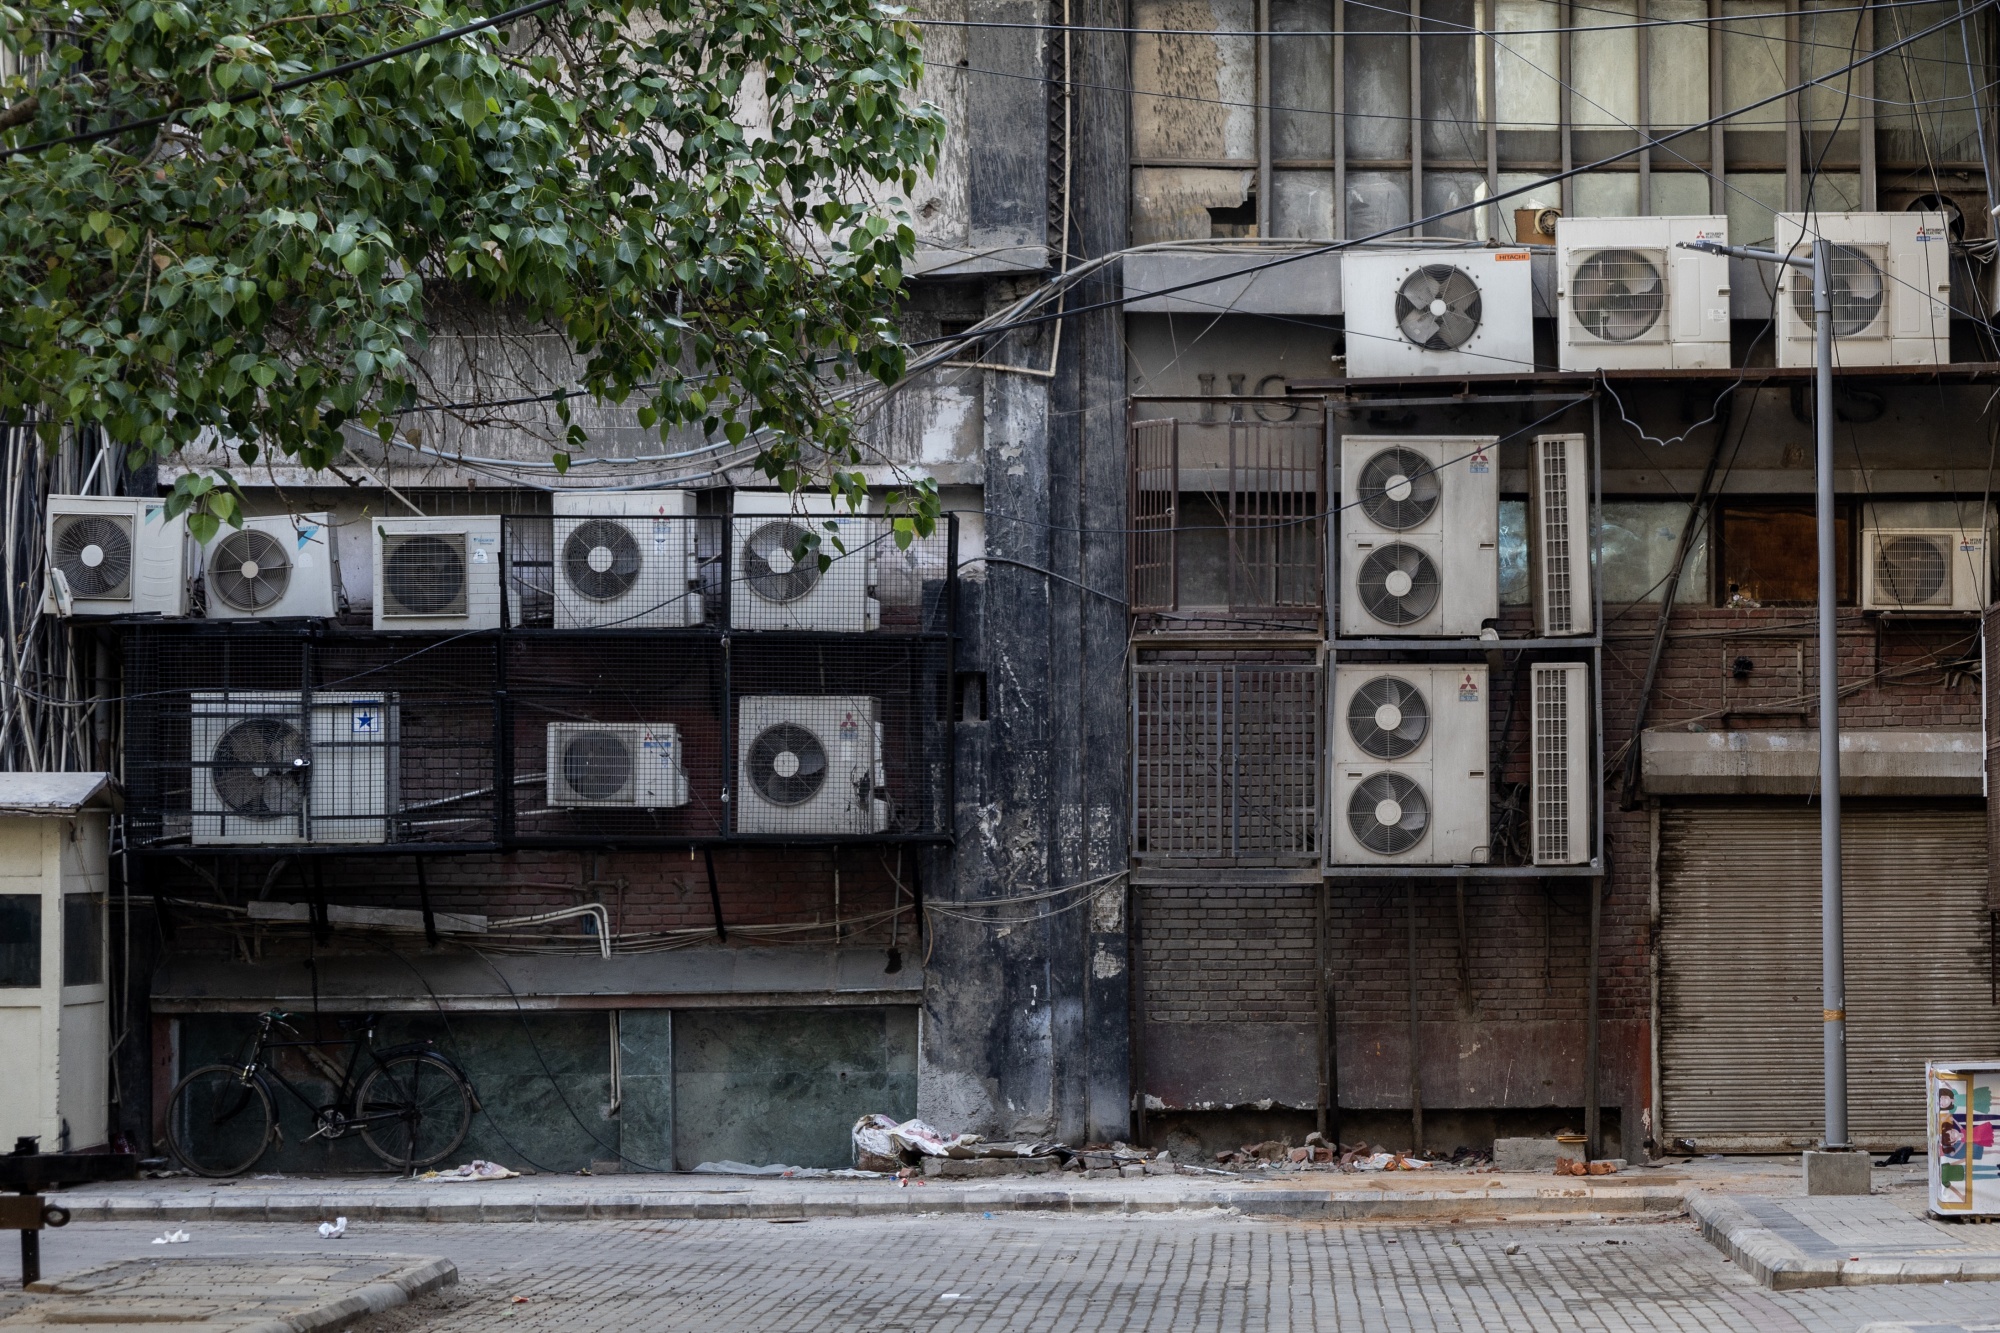 Rising Demand for Air Conditioners in India Amidst Severe Heatwave Challenges